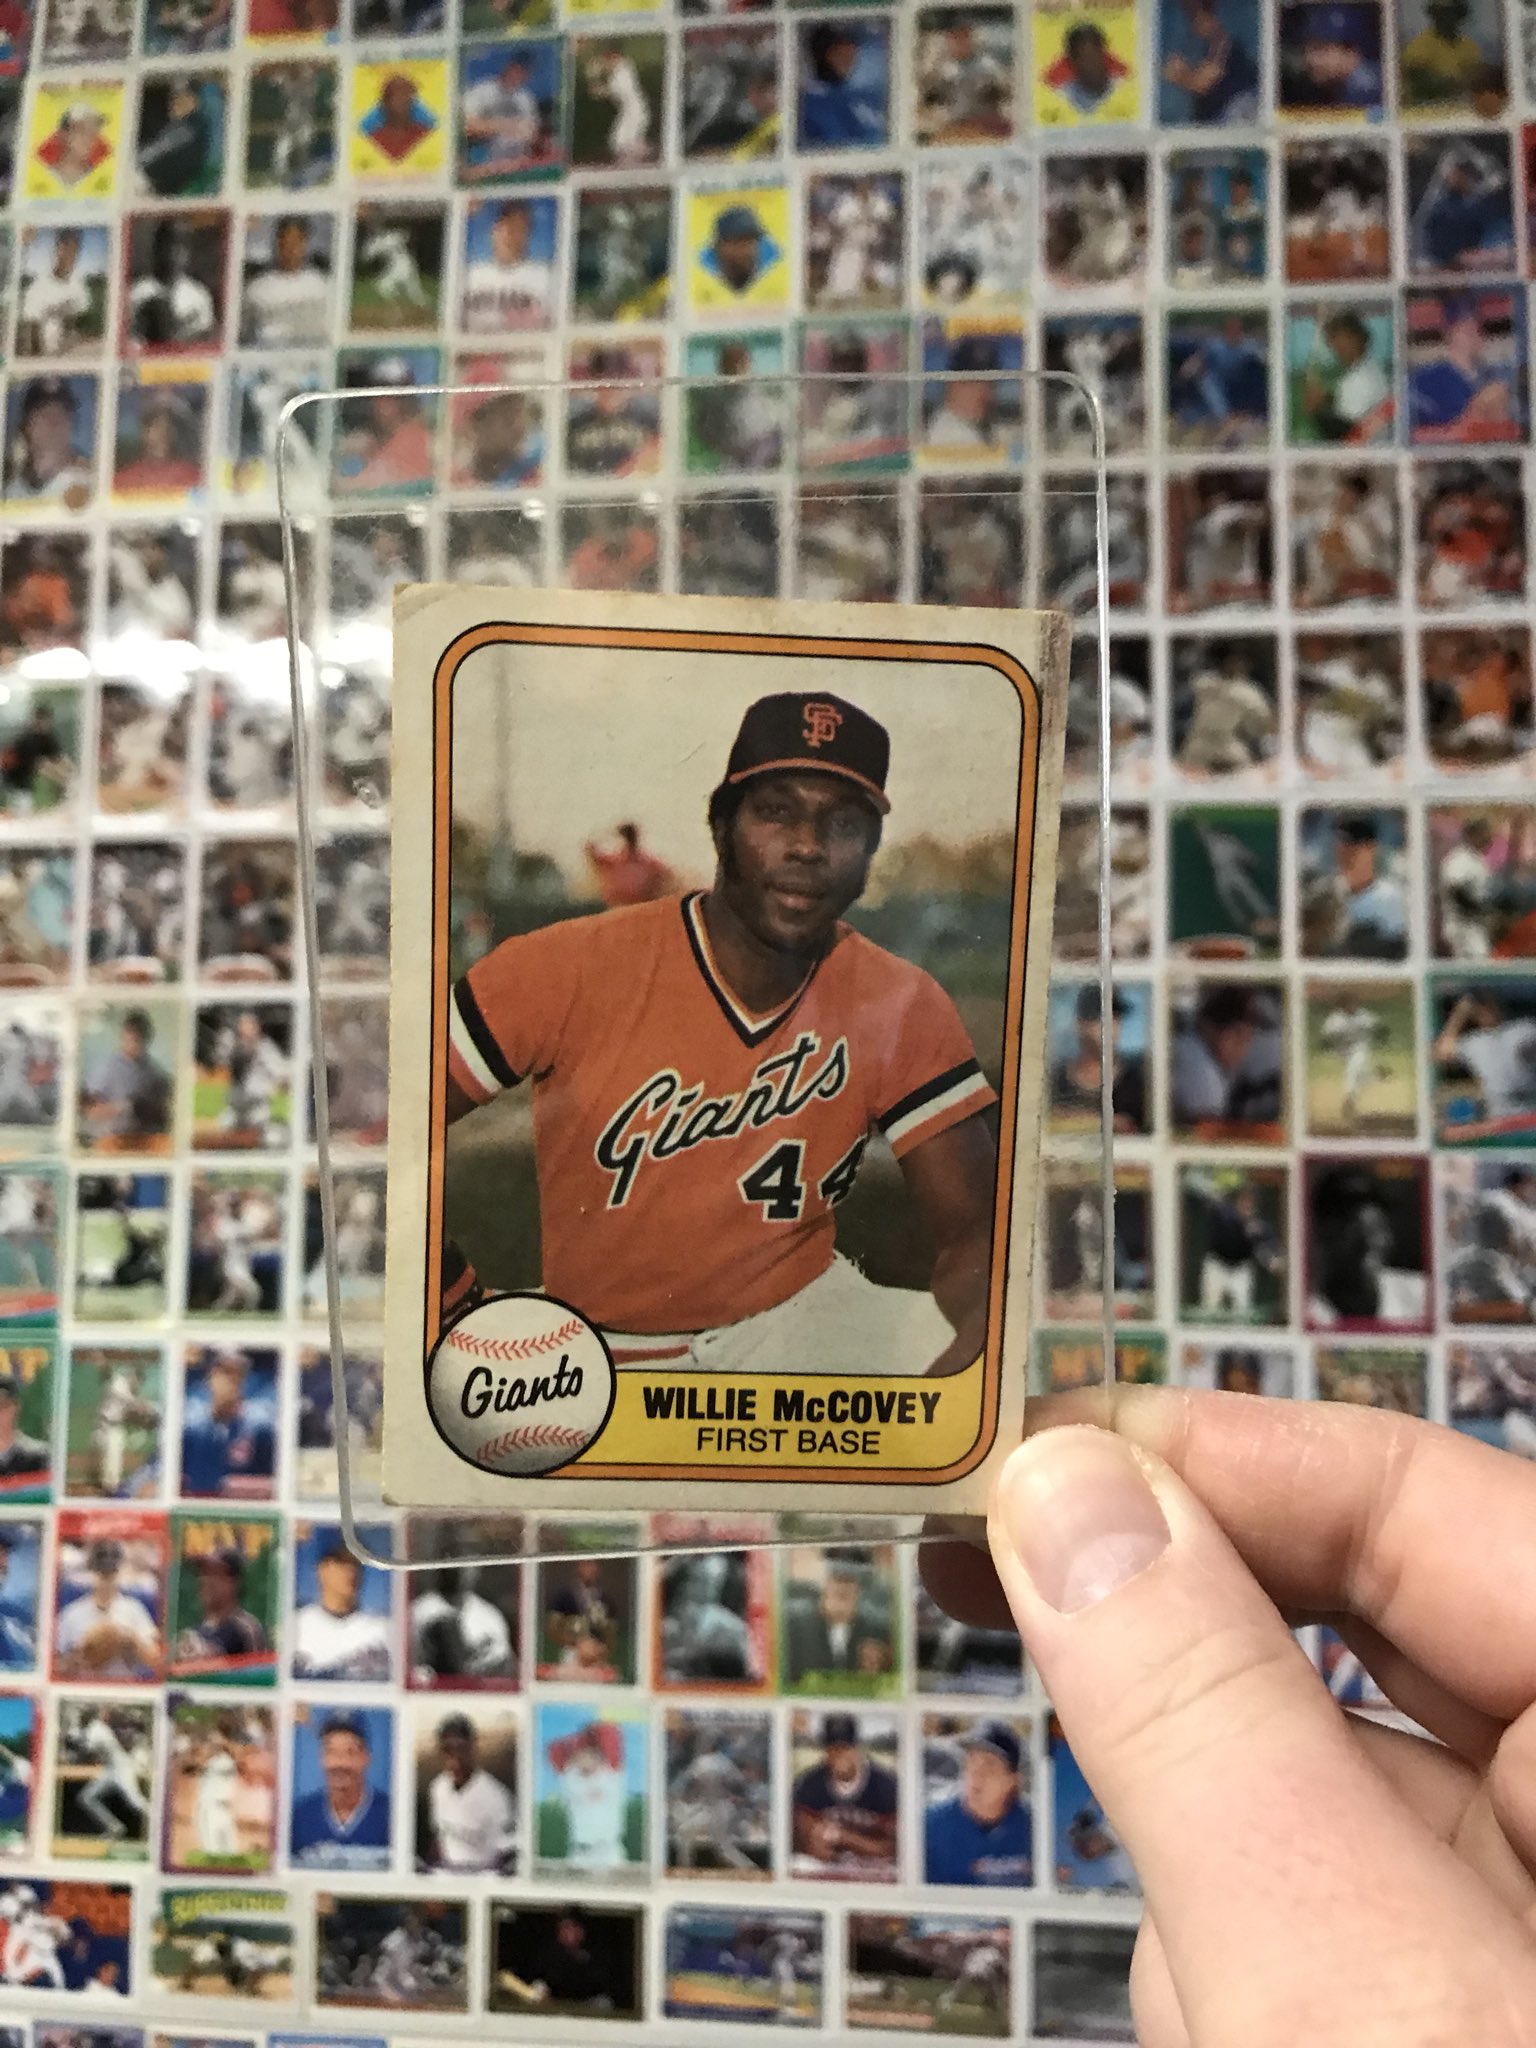 Dug this bad boy up to wish a Happy 80th Birthday to the great Willie McCovey  